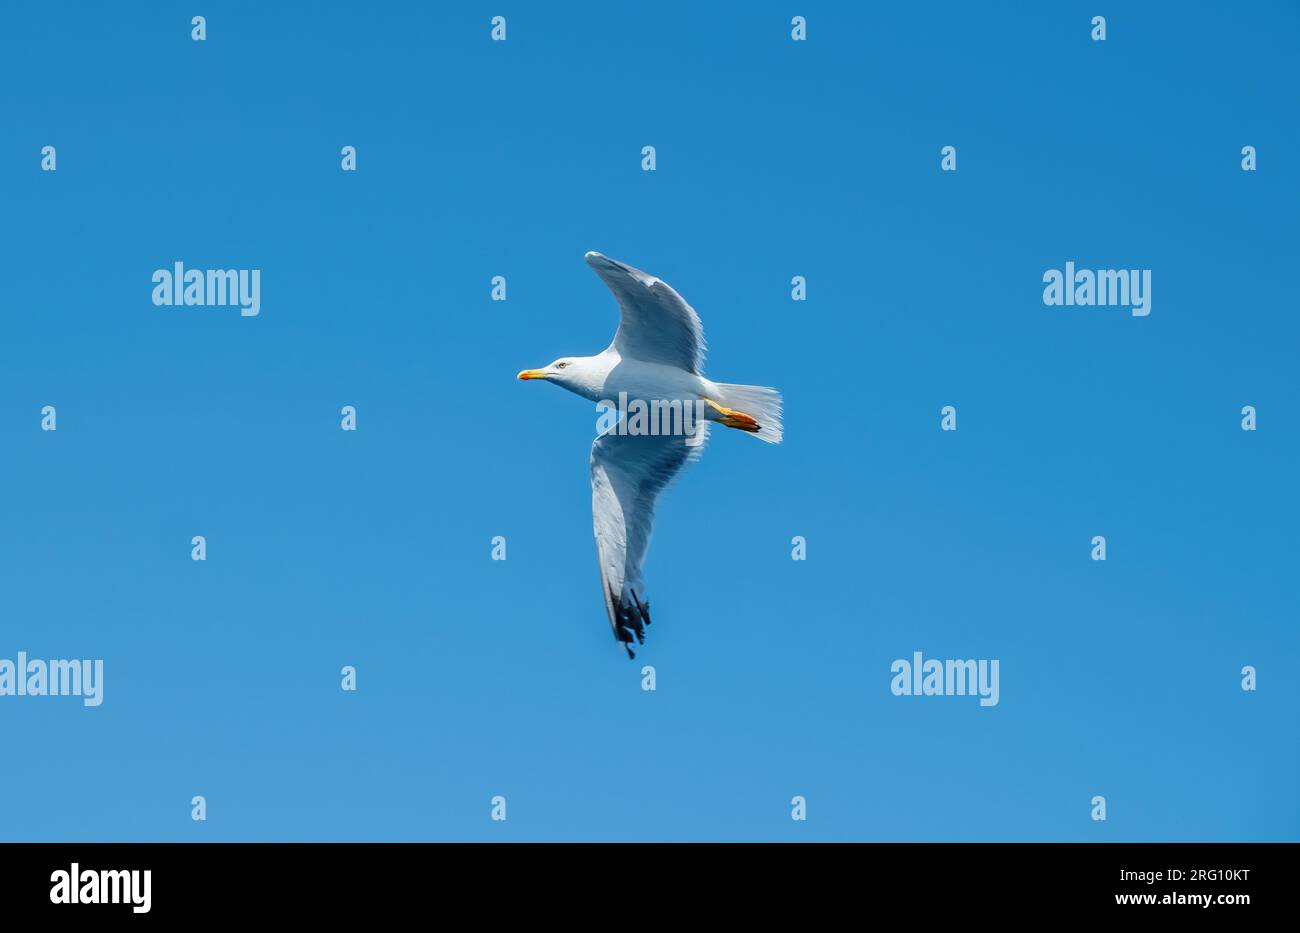 Seagull flying on clear blue sky Stock Photo